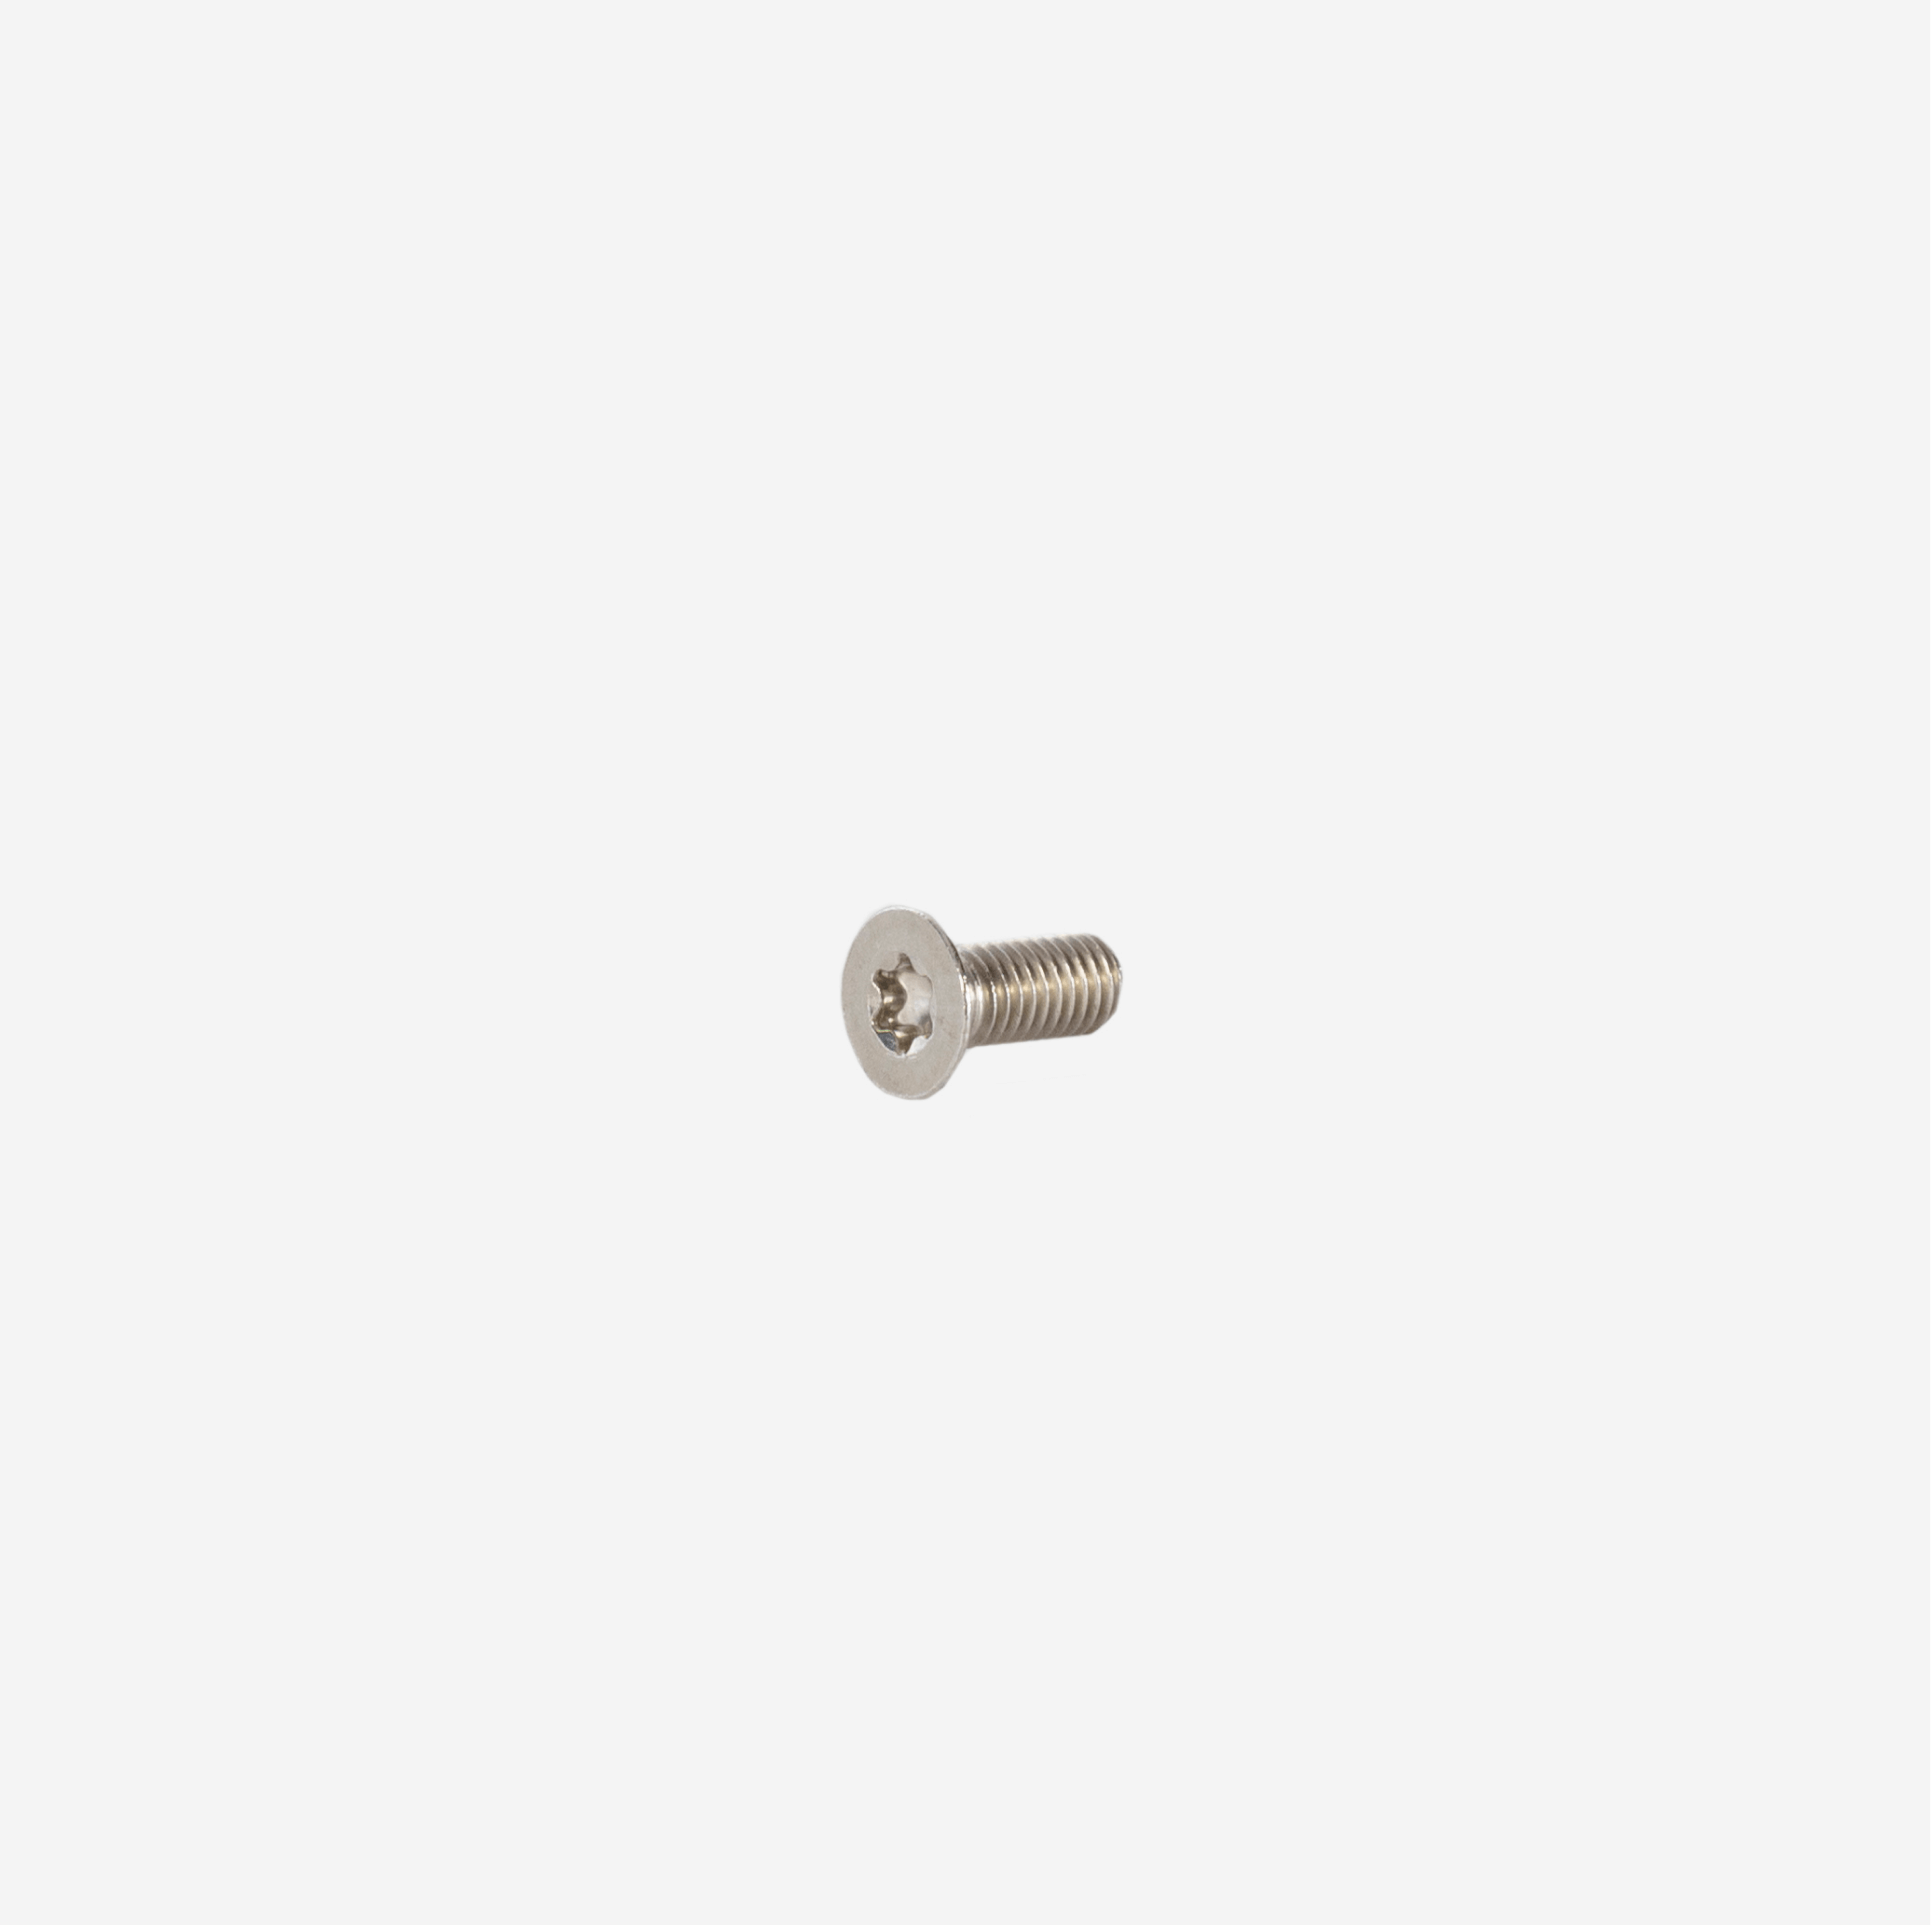 SGL-1116 Screw for End and Retention Pads DIN 965 M5X12 TX25